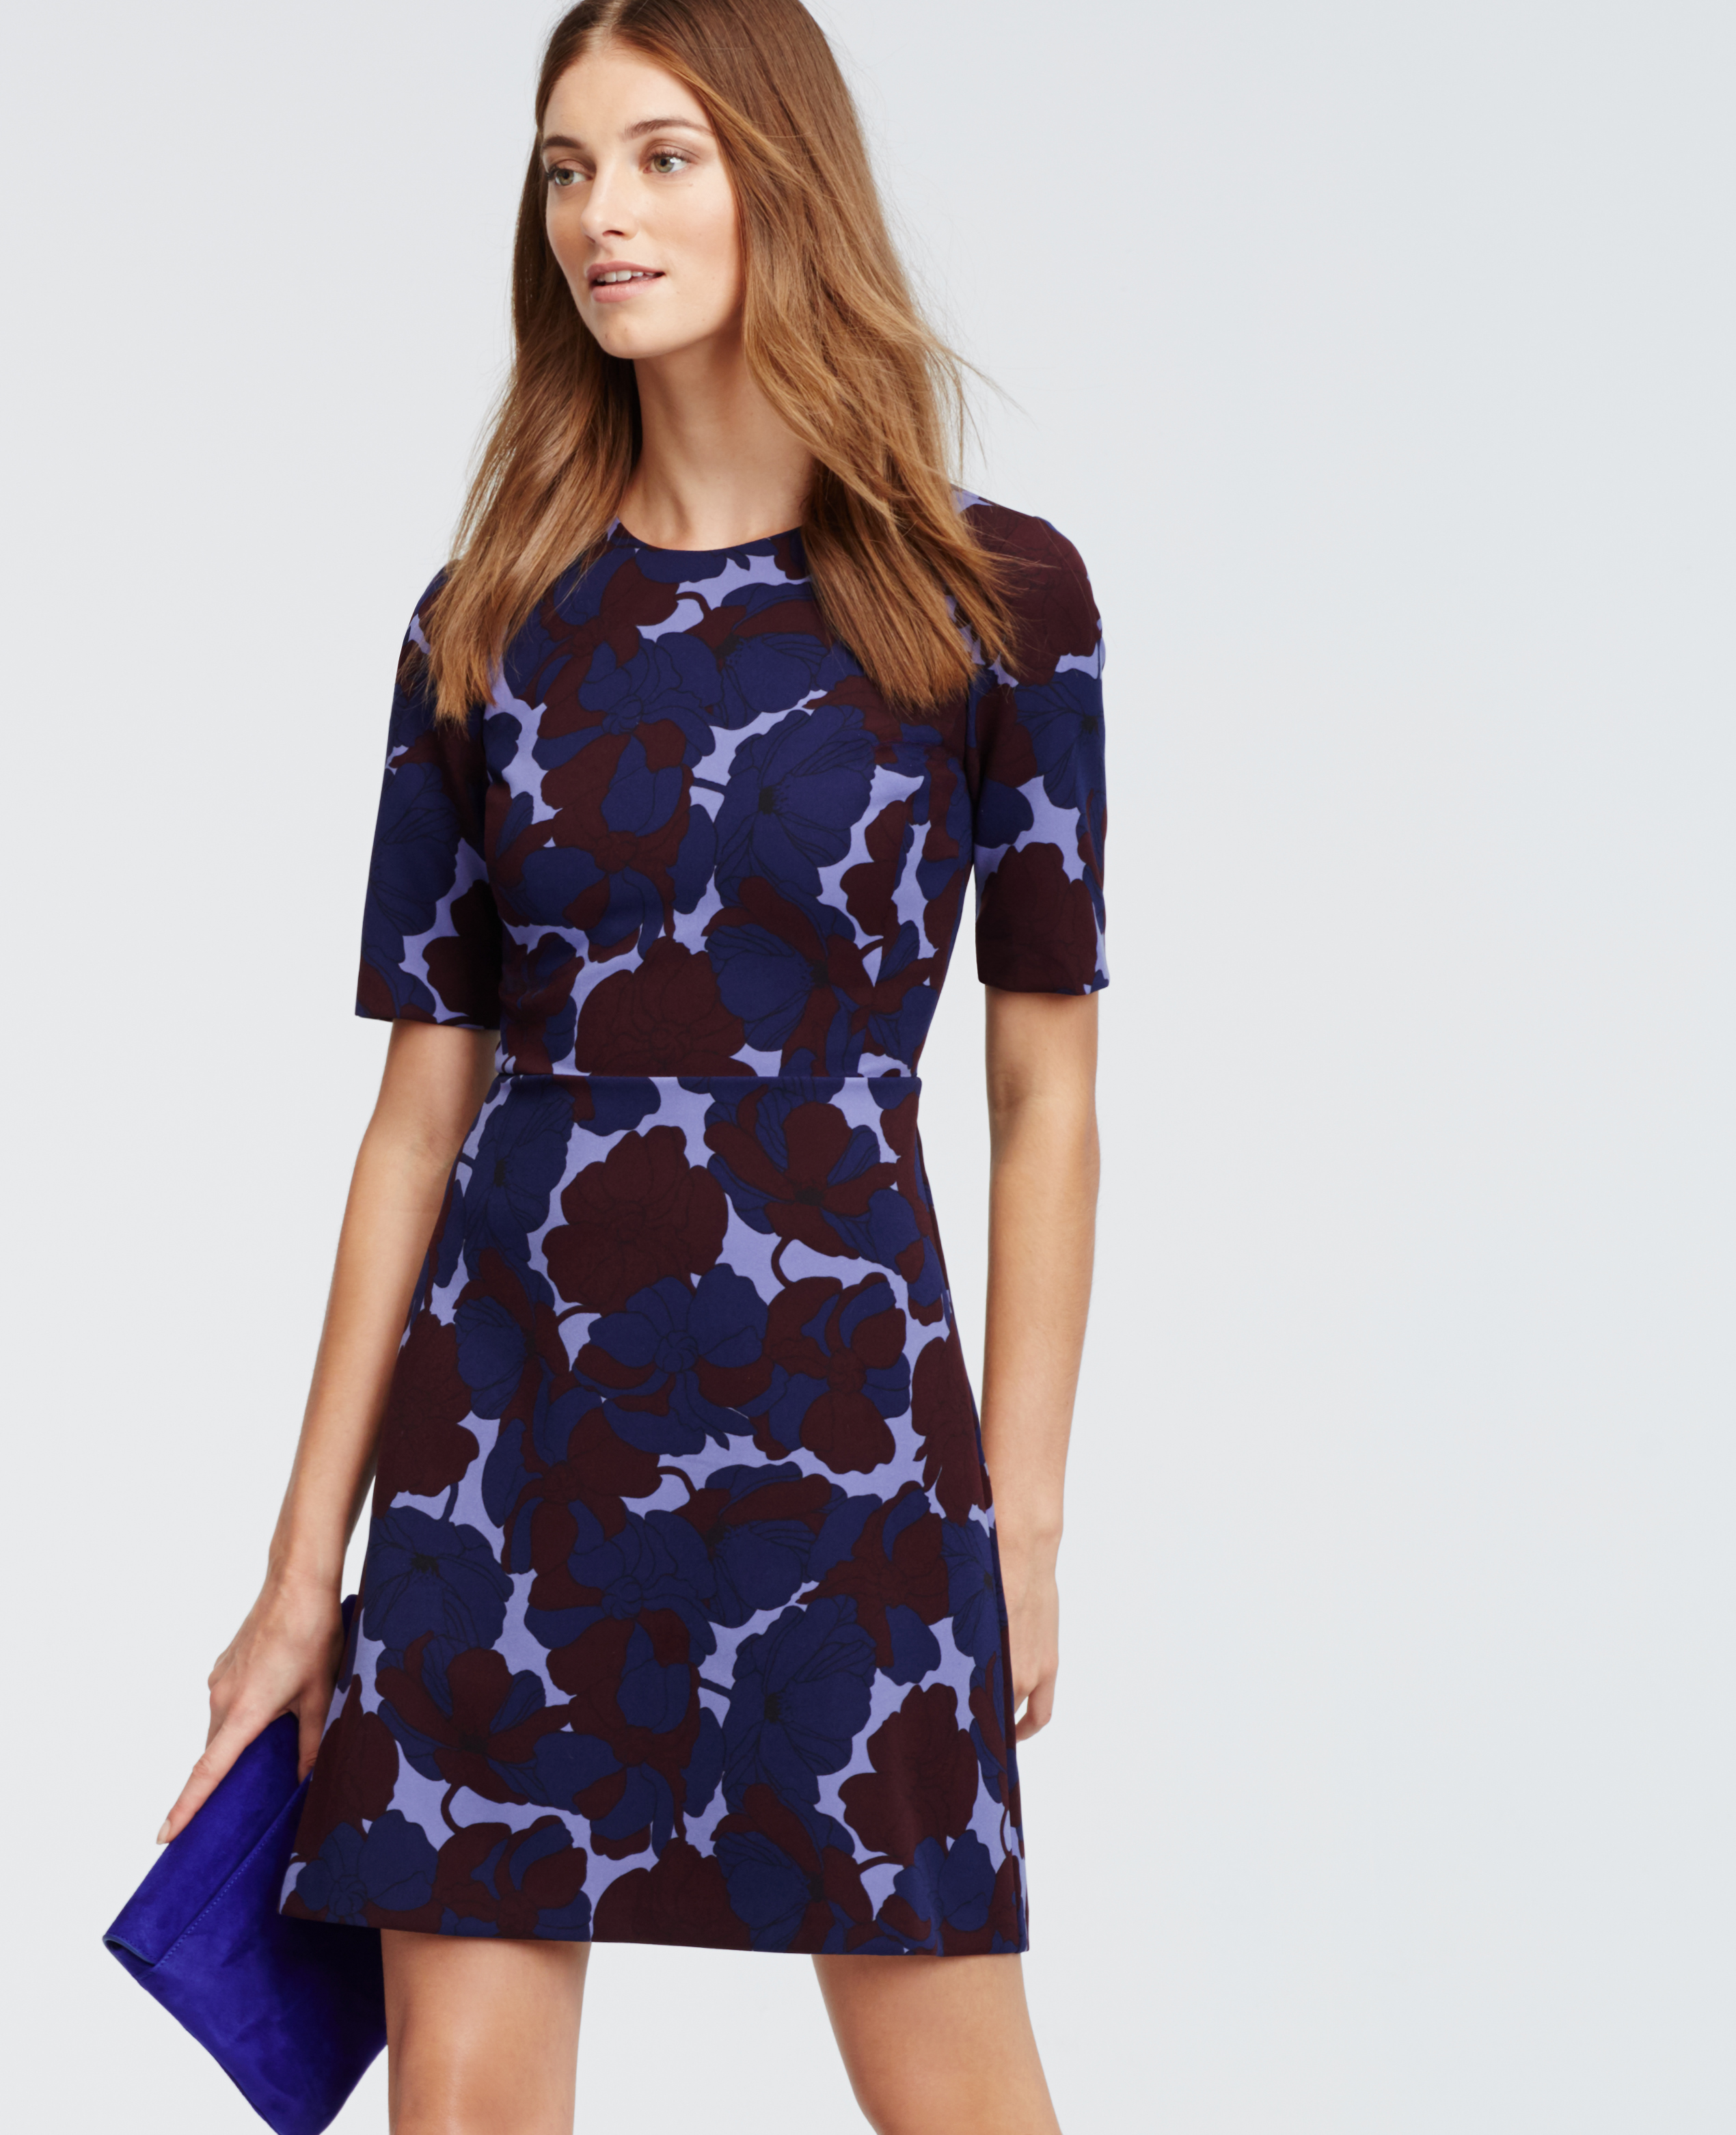 Lyst - Ann Taylor Petite Abstract Floral Dress in Blue